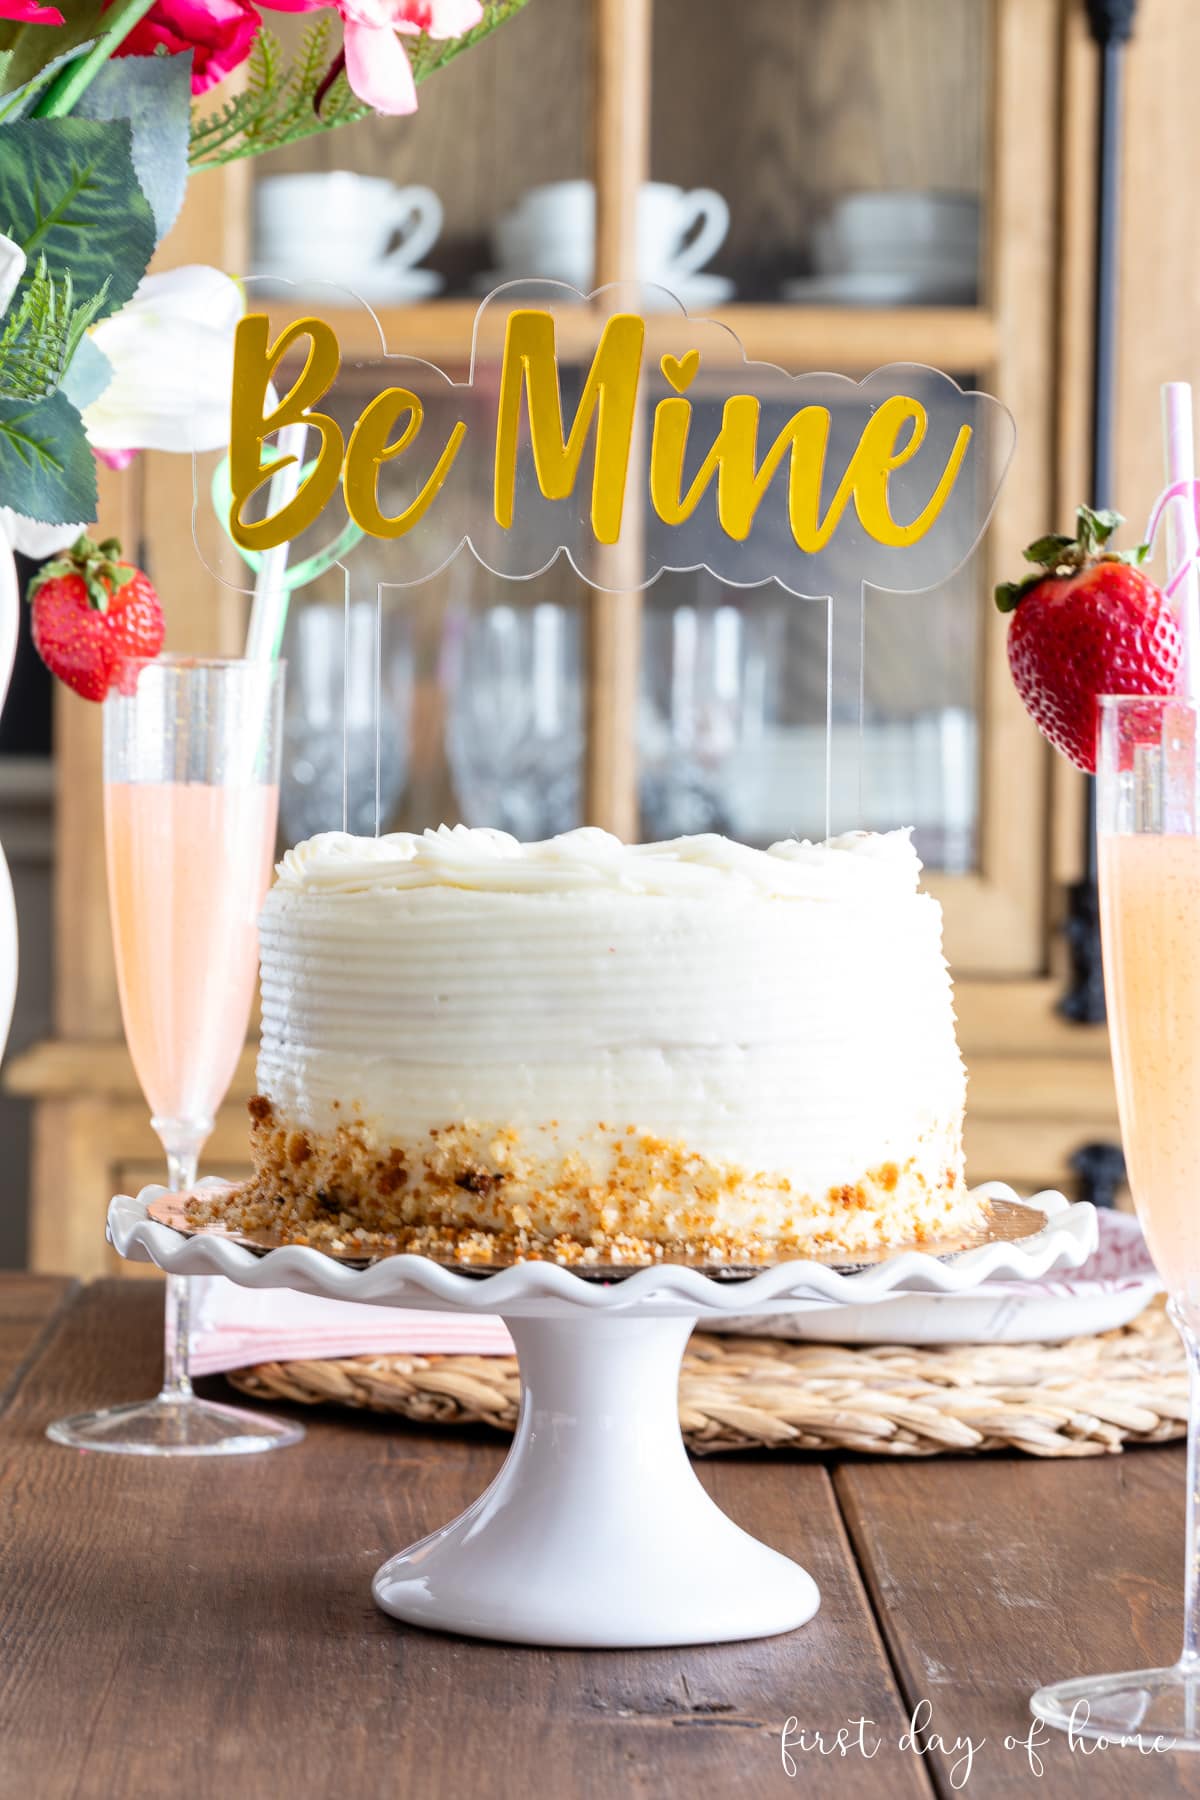 Cake on pedestal with laser cut acrylic cake topper that reads "Be Mine".